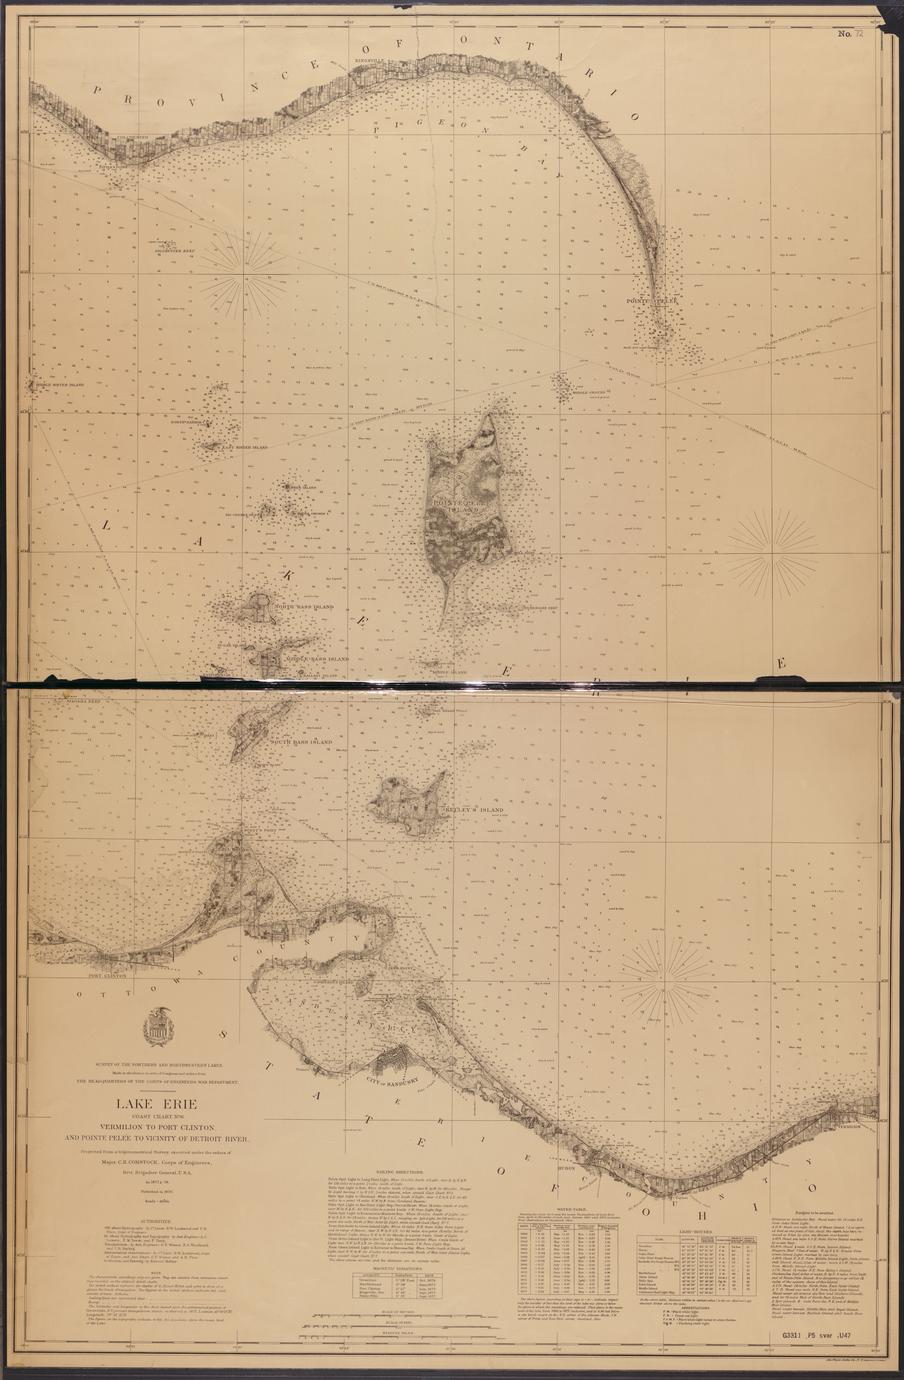 Lake Erie coast chart no. 6. Vermillion to Port Clinton, and Pointe Pelée to vicinity of Detroit River